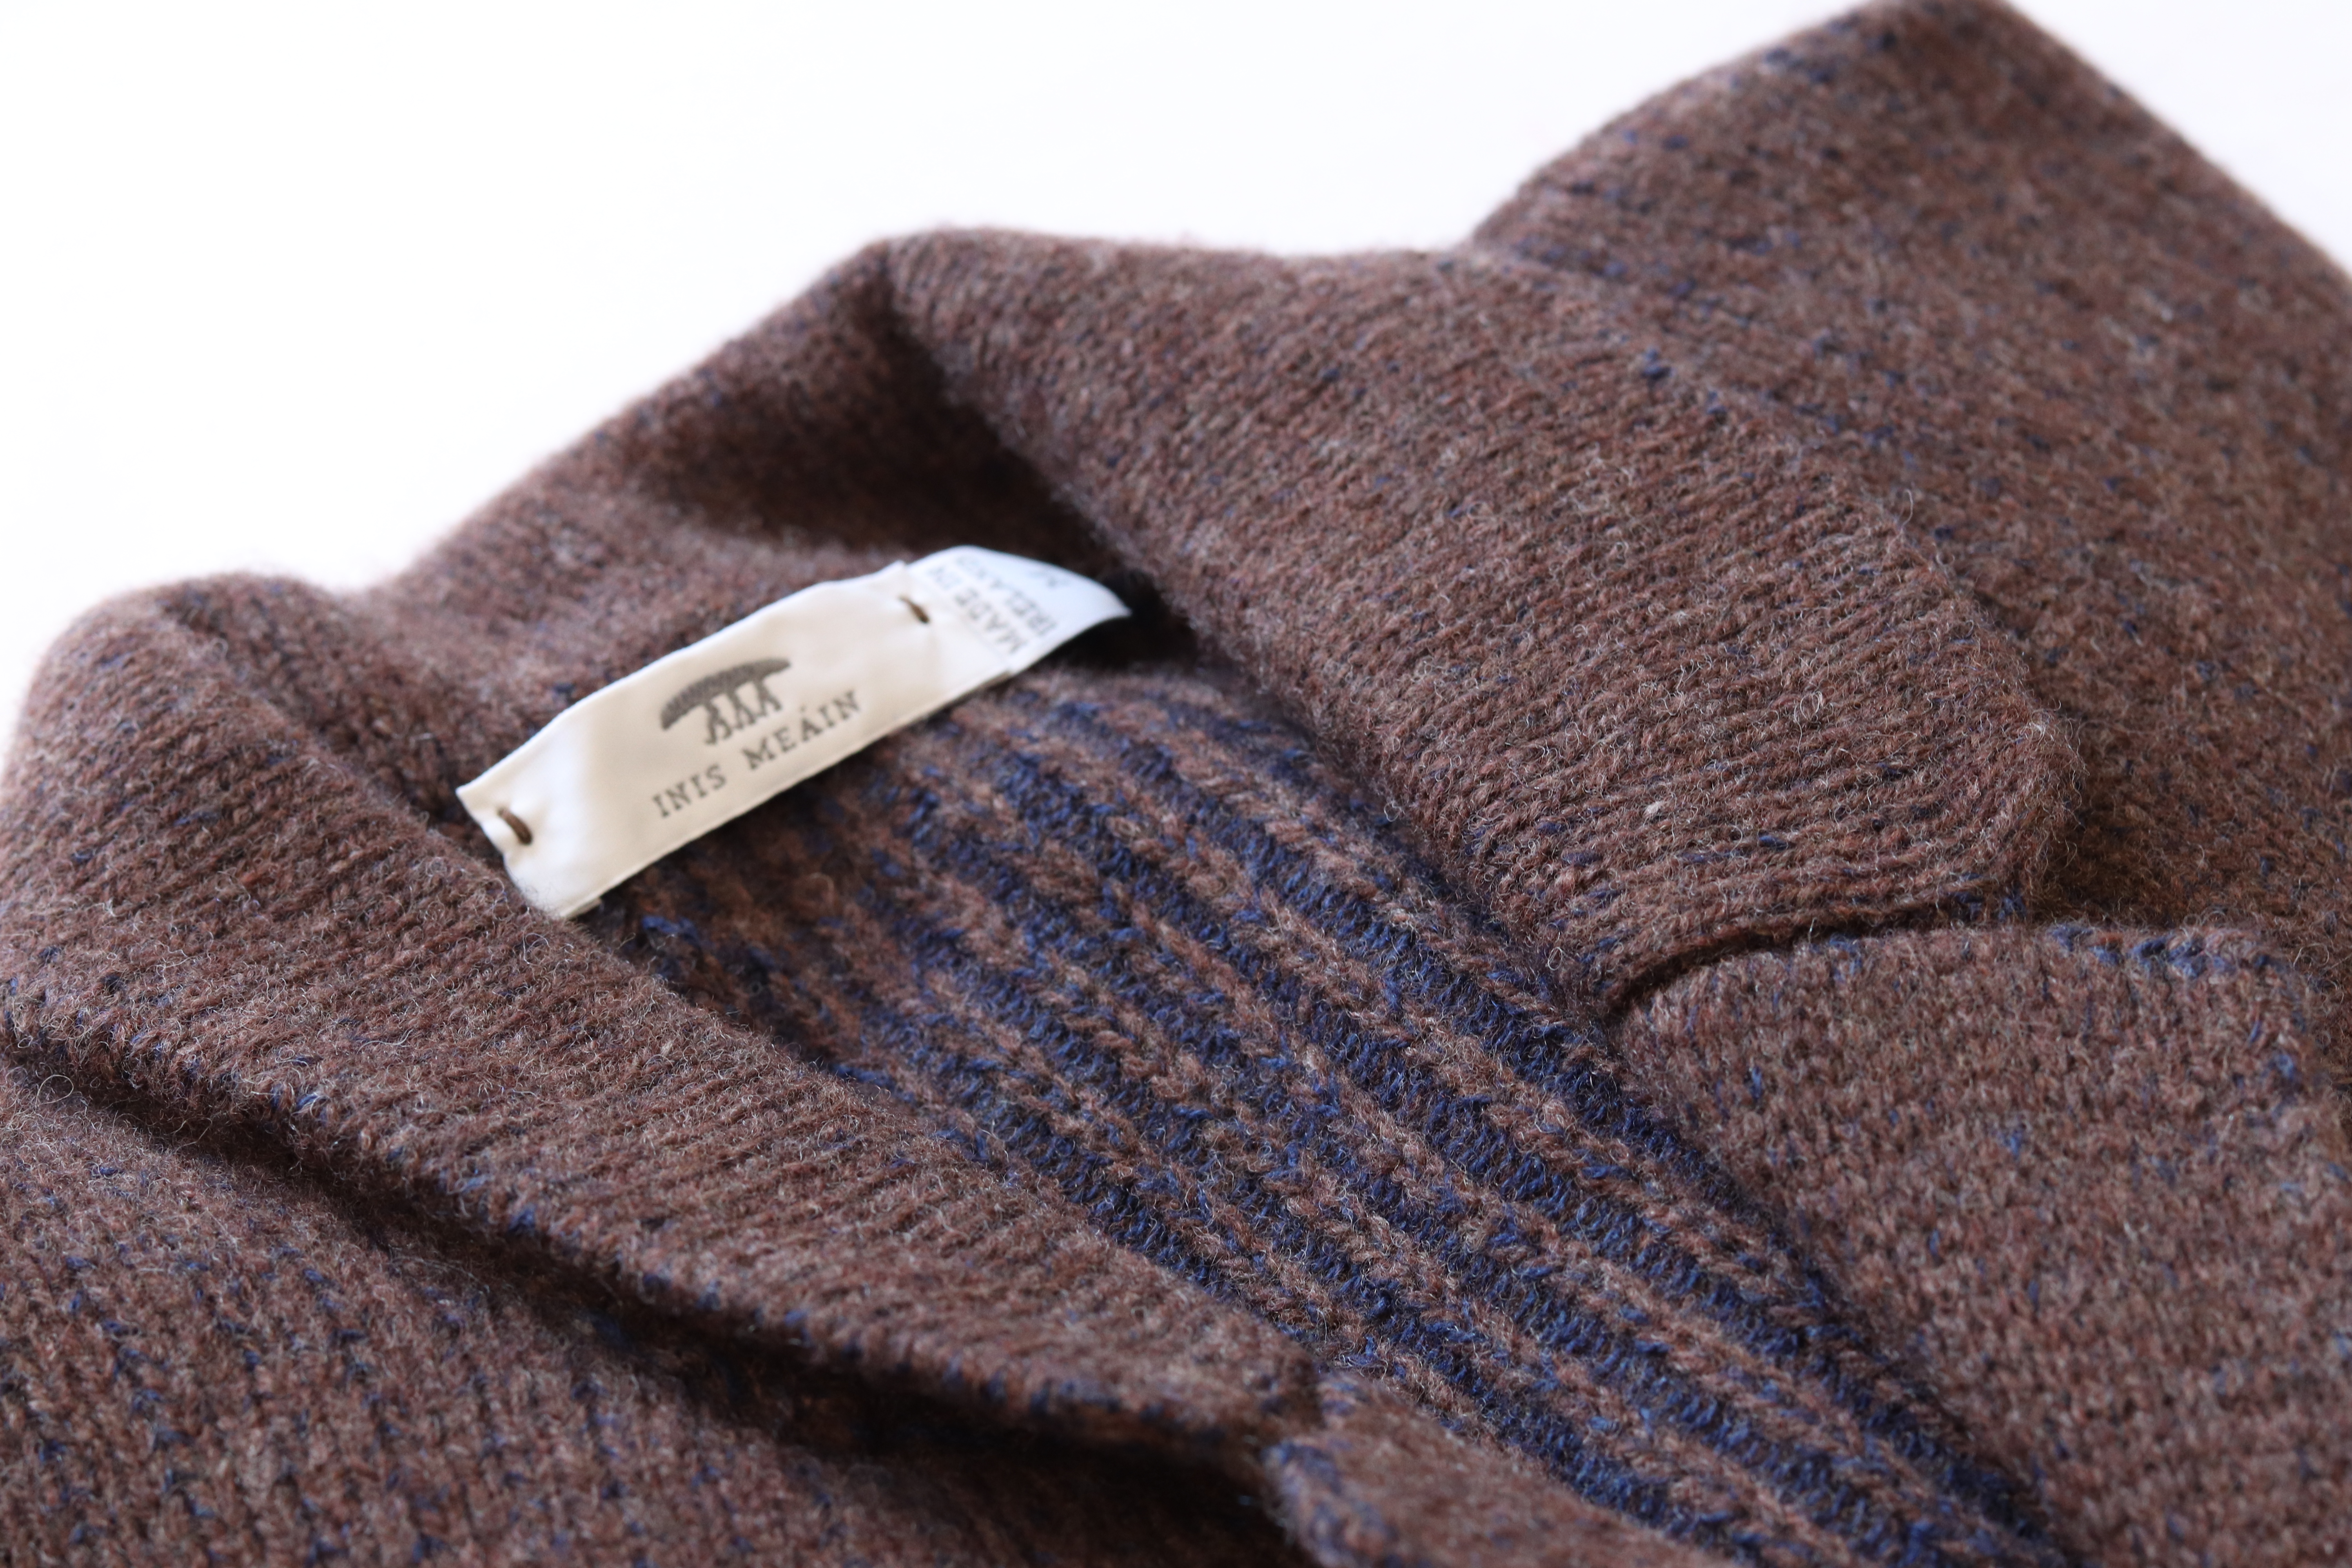 Plated Pub Jacket | Inis Meáin Knitting Co.